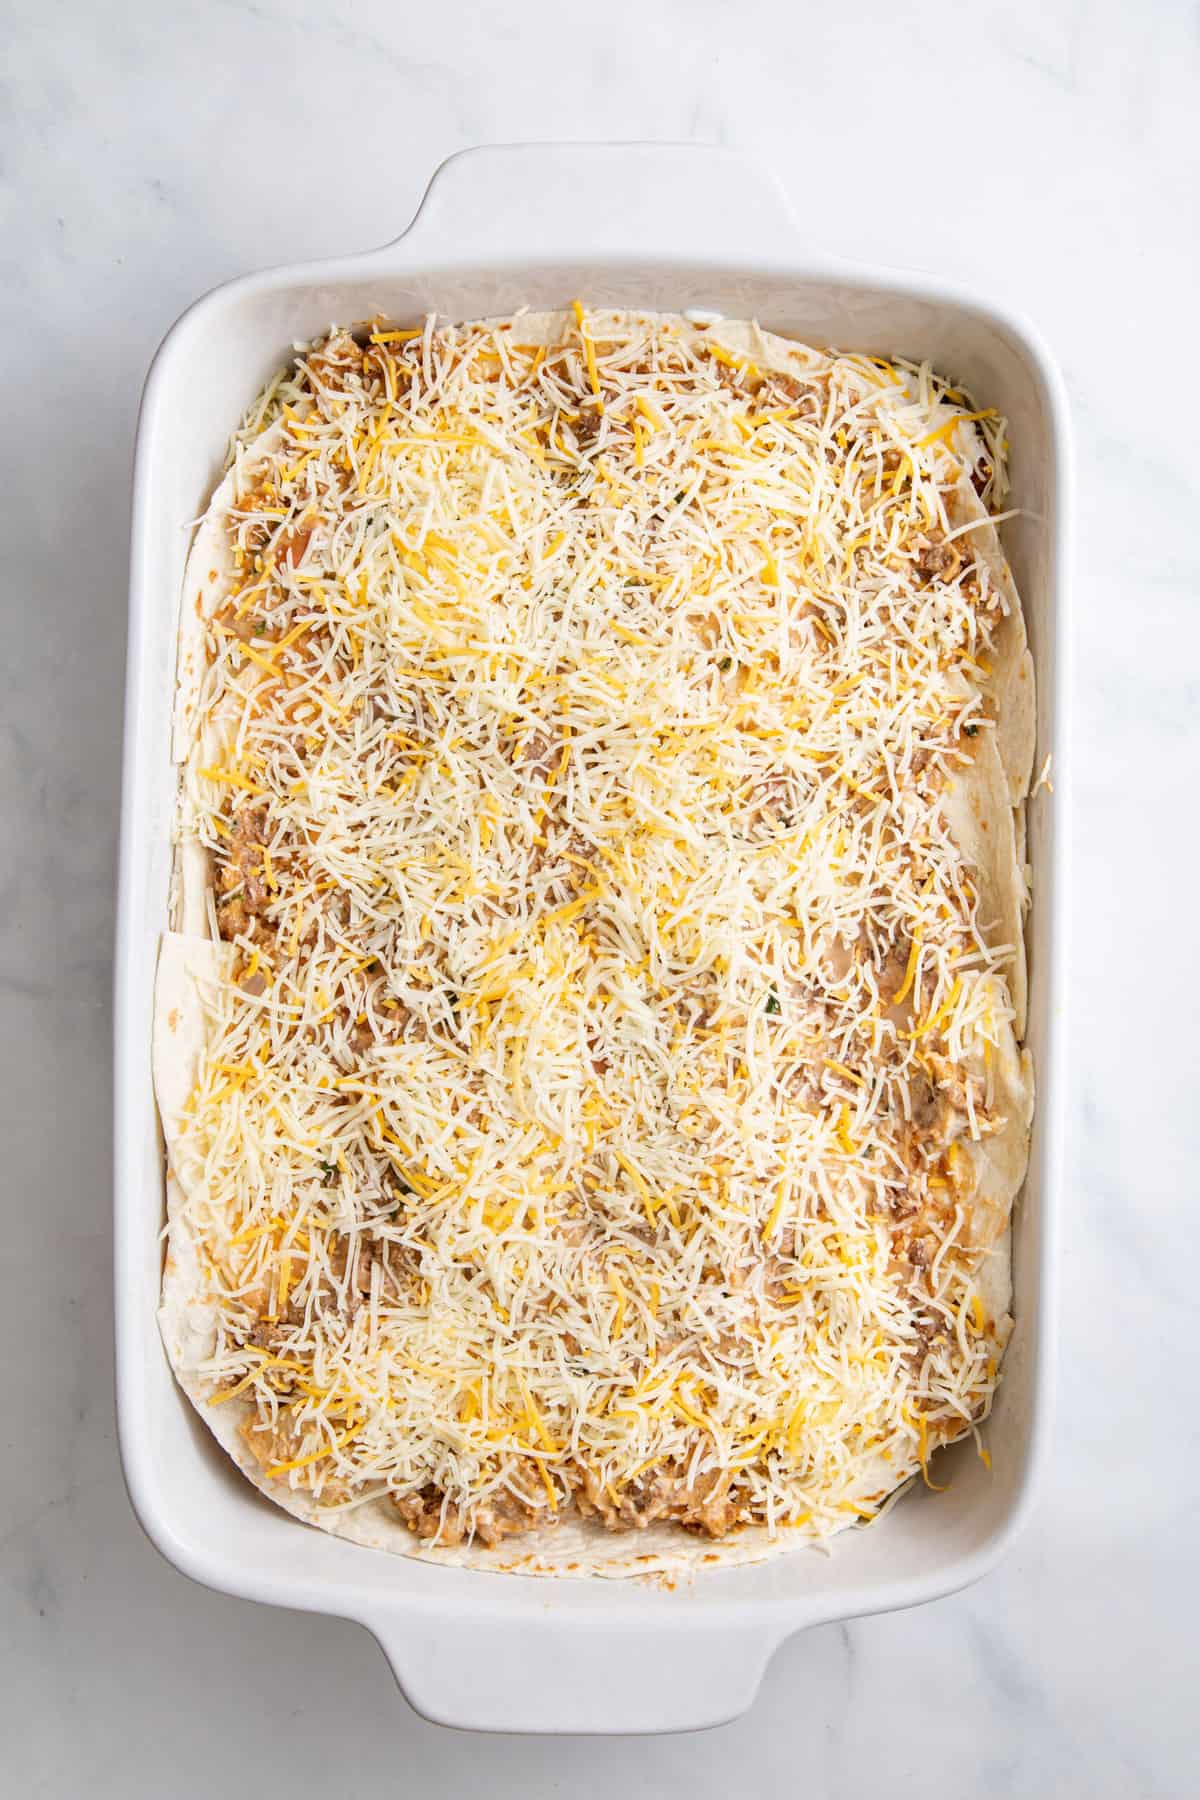 step 4 to make burrito casserole, repeat layer finishing with shredded cheese on top